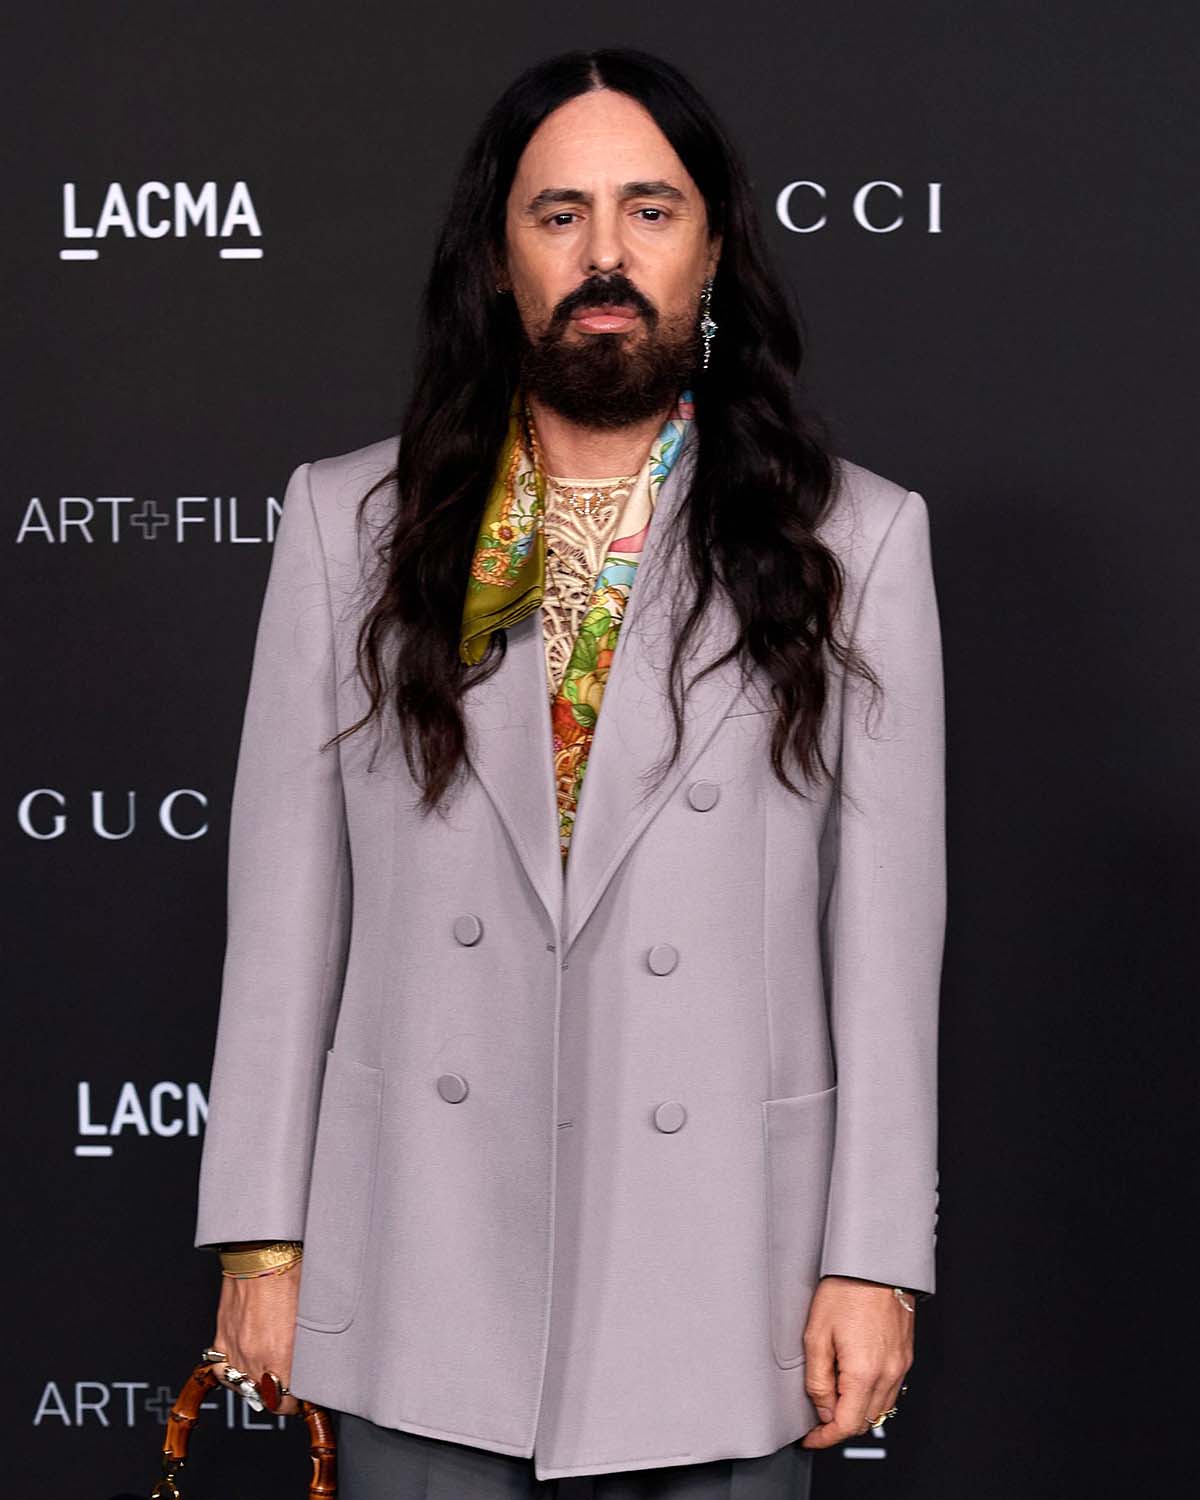 Gucci's Alessandro Michele Out as Creative Director: Details